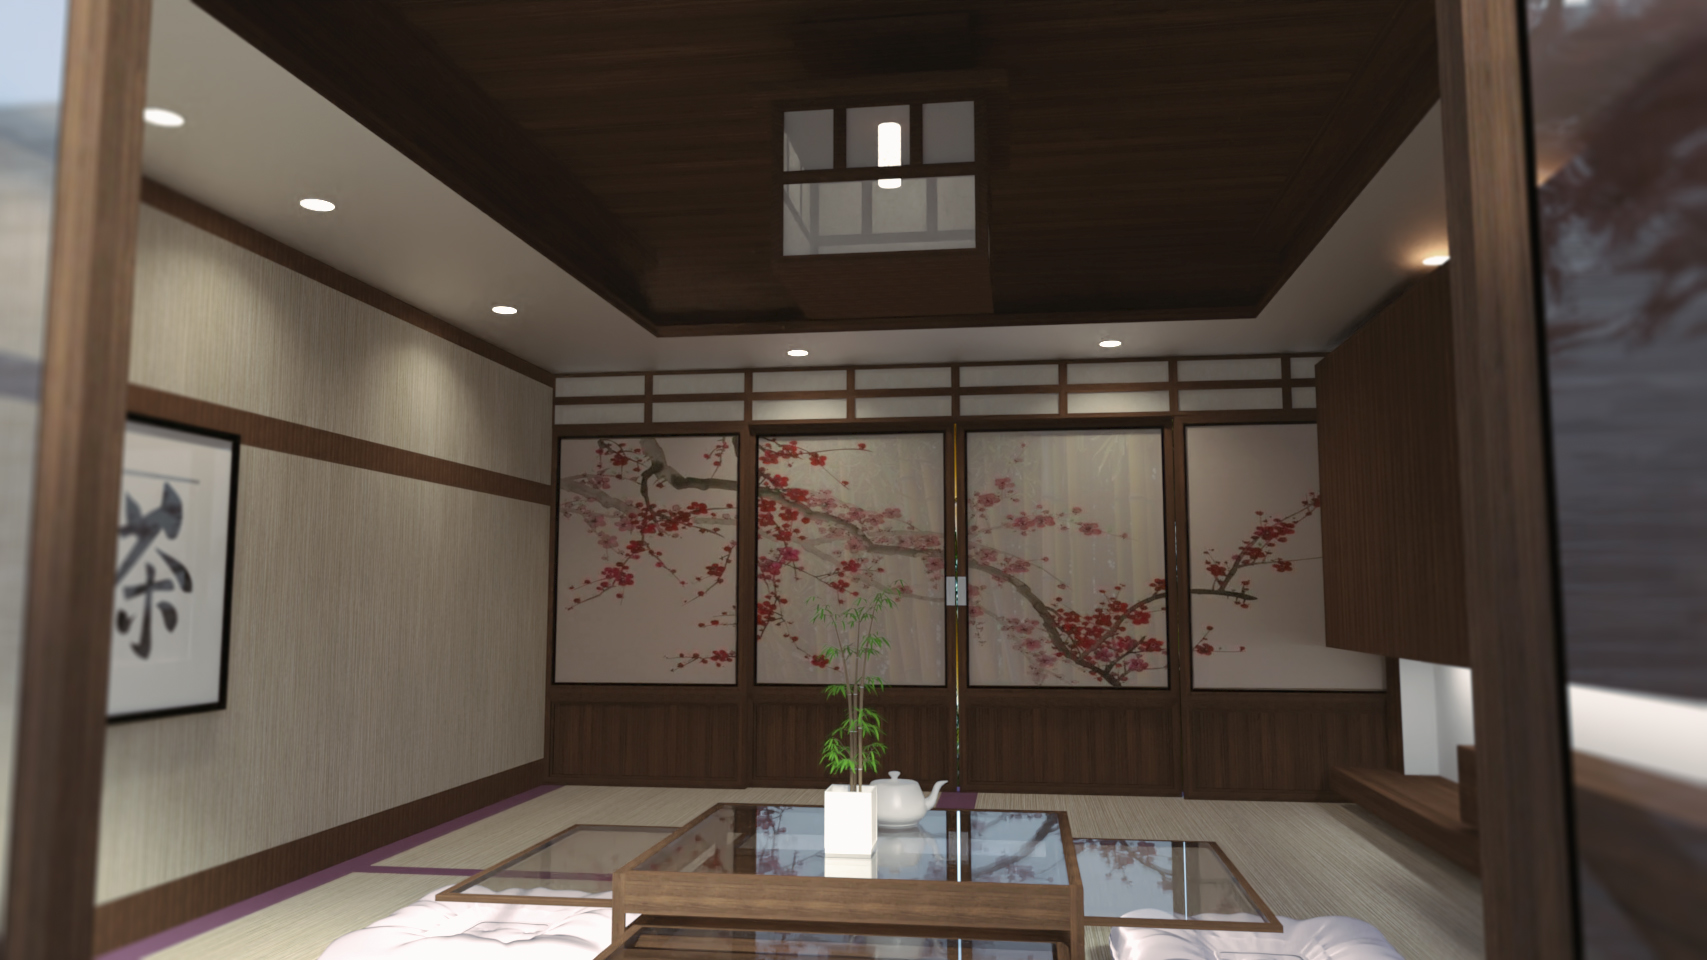 Japanese Dining Room by: Digitallab3D, 3D Models by Daz 3D